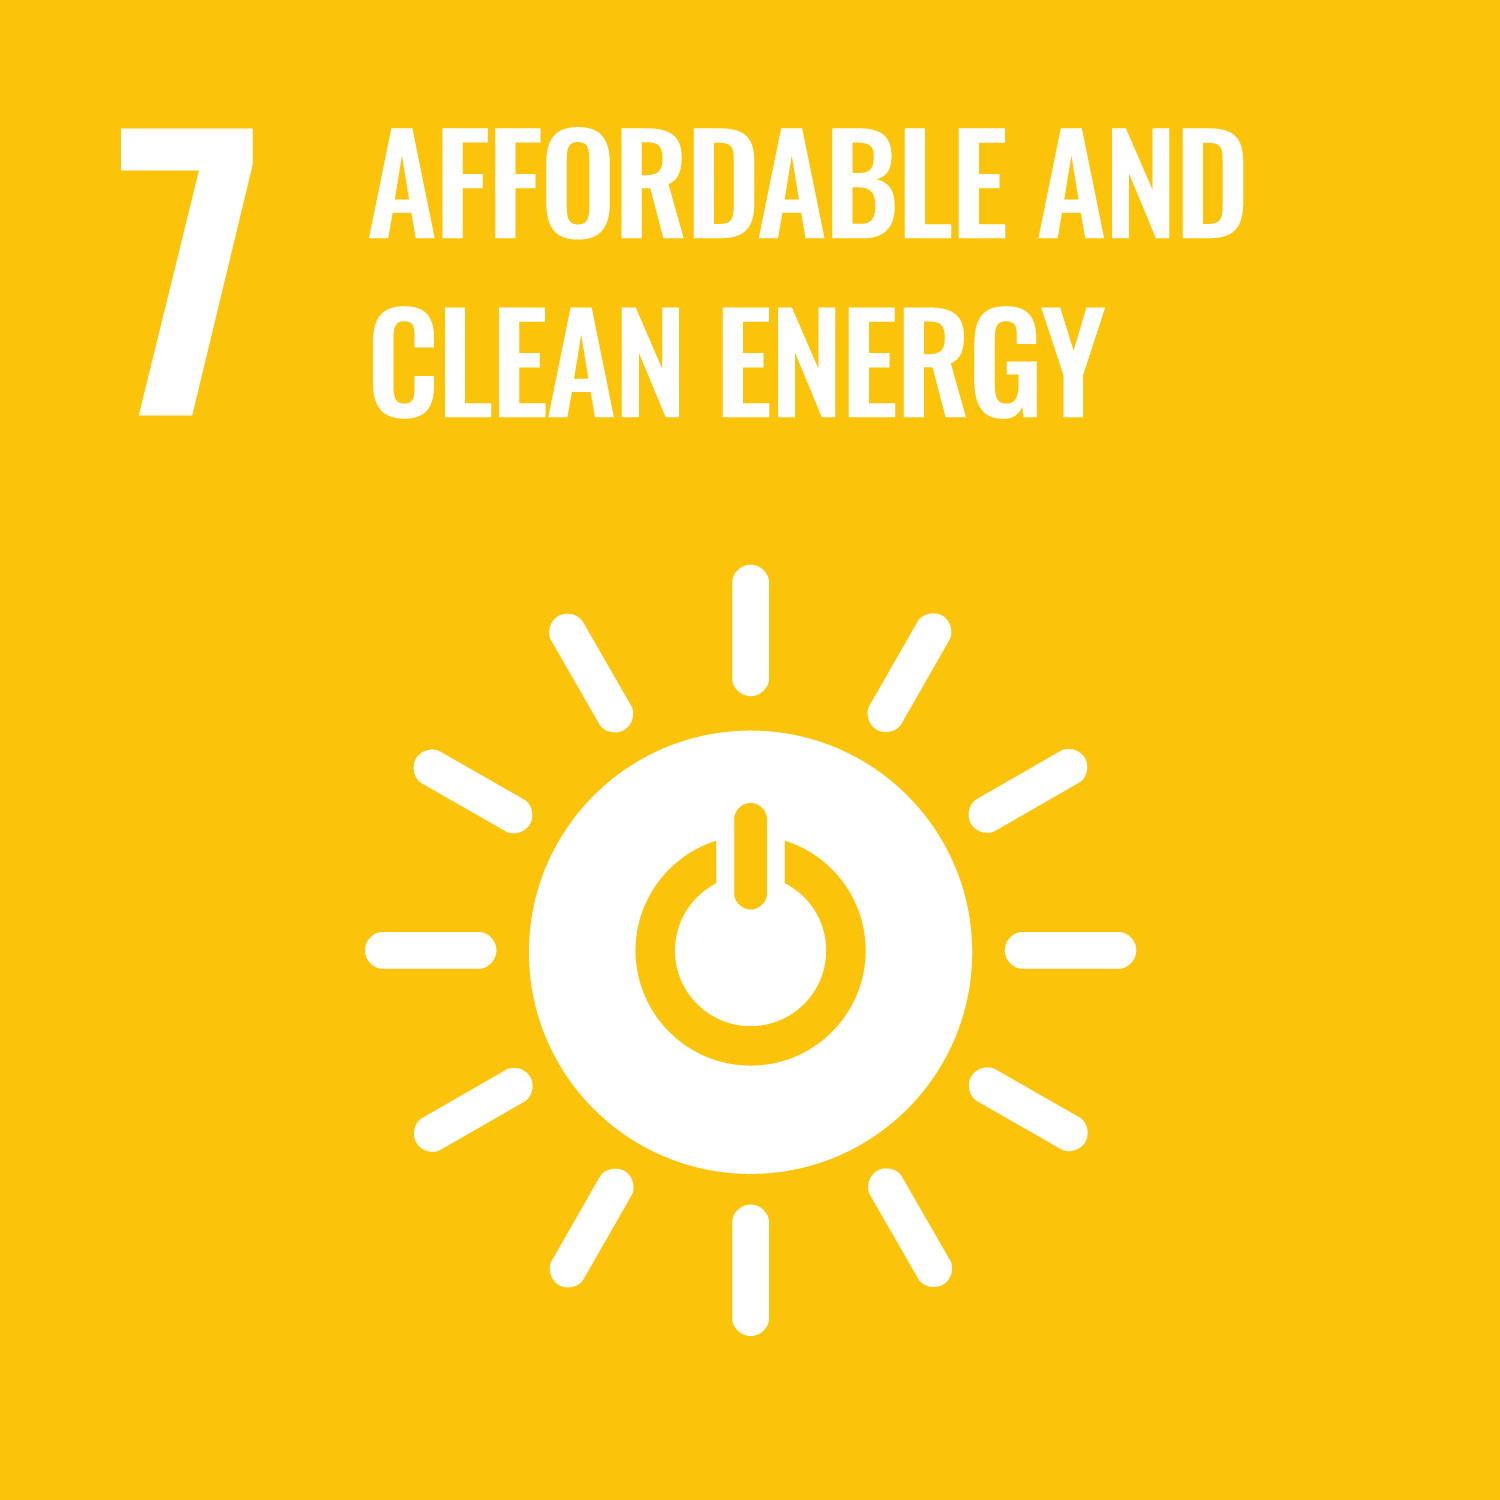 UN SDG 7 - Affordable and Clean Energy